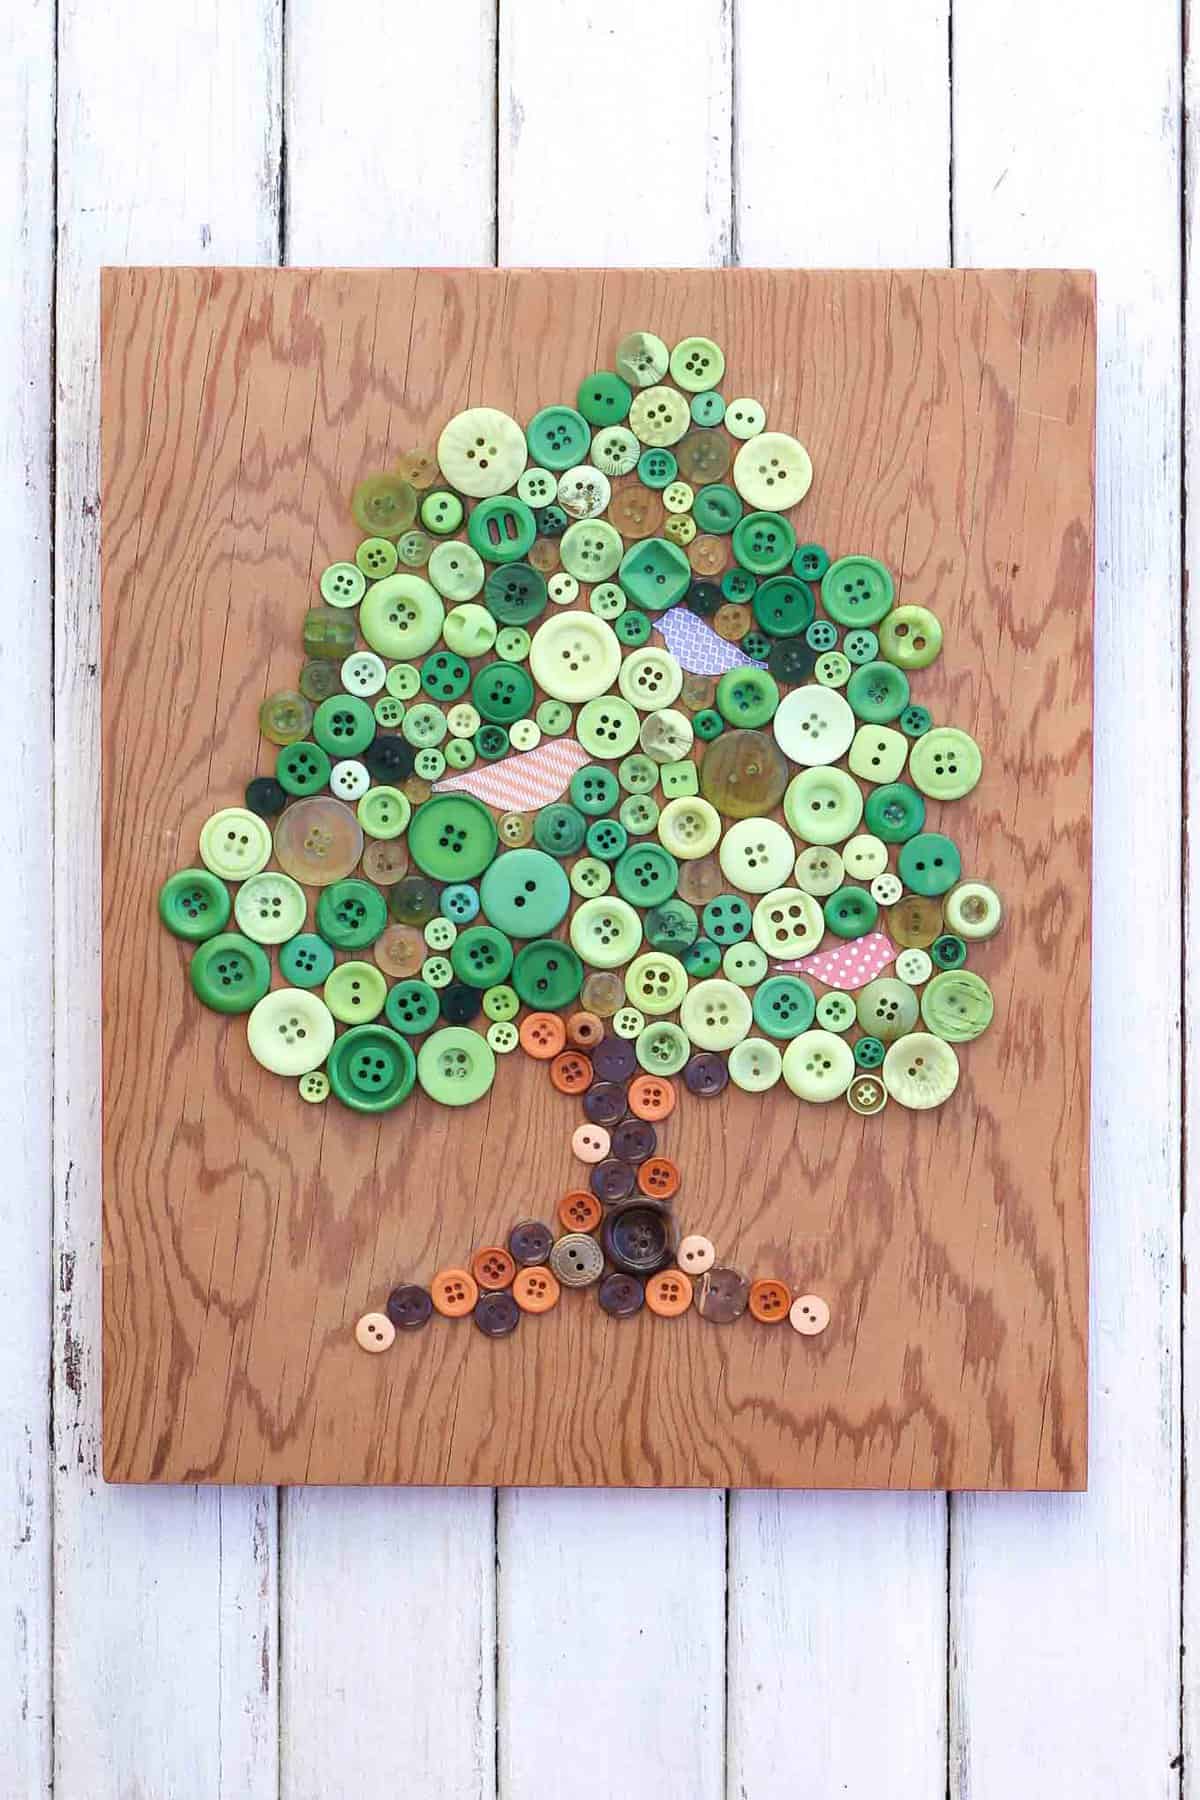 This DIY button art project makes a great Earth Day craft idea. It also looks sweet in a baby's room or nursery, especially as part of a gallery wall. Free printable template to make your own. Click for the full tutorial. | MakeAndDoCrew.com